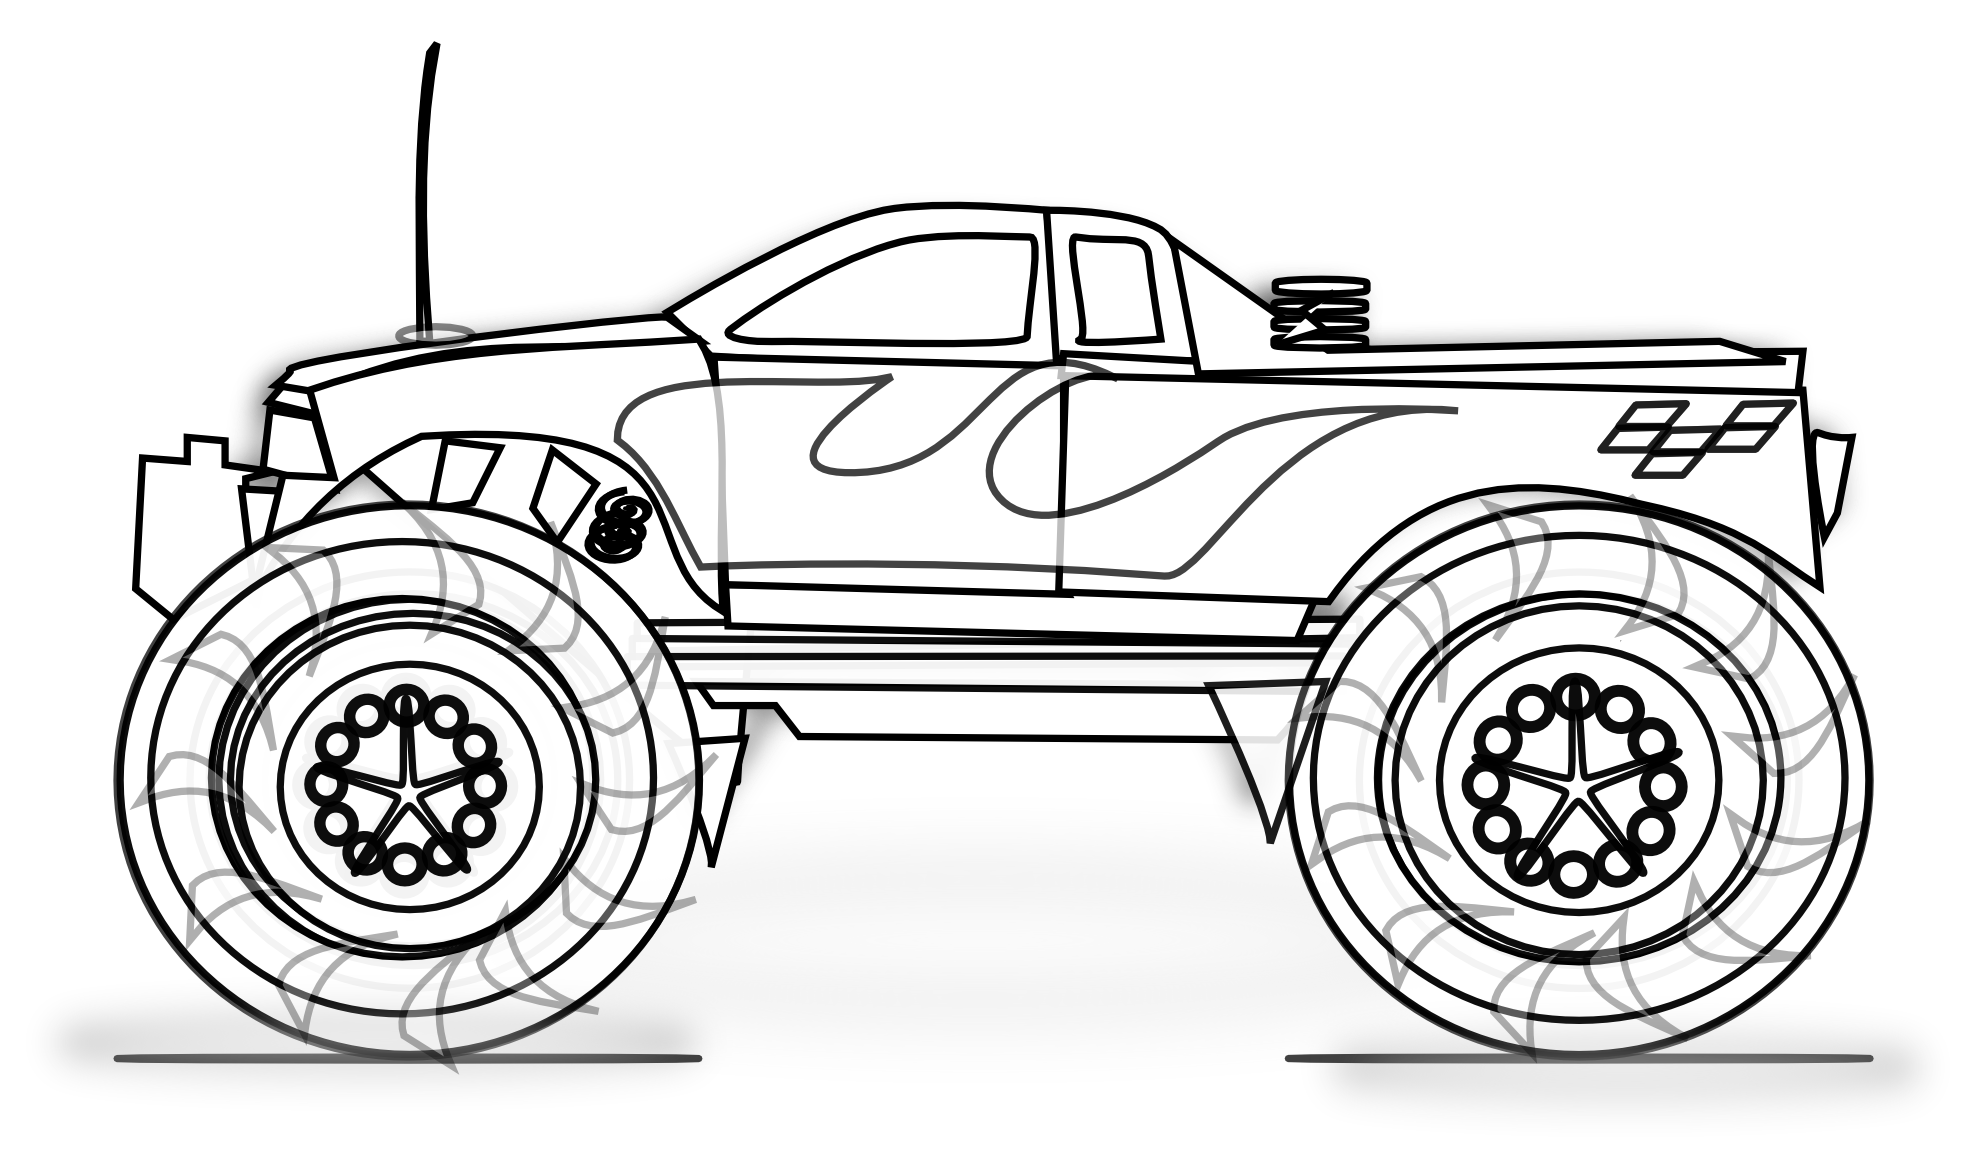 Truck coloring pages | color printing | coloring sheets | #65 Free Printable Coloring Pages For